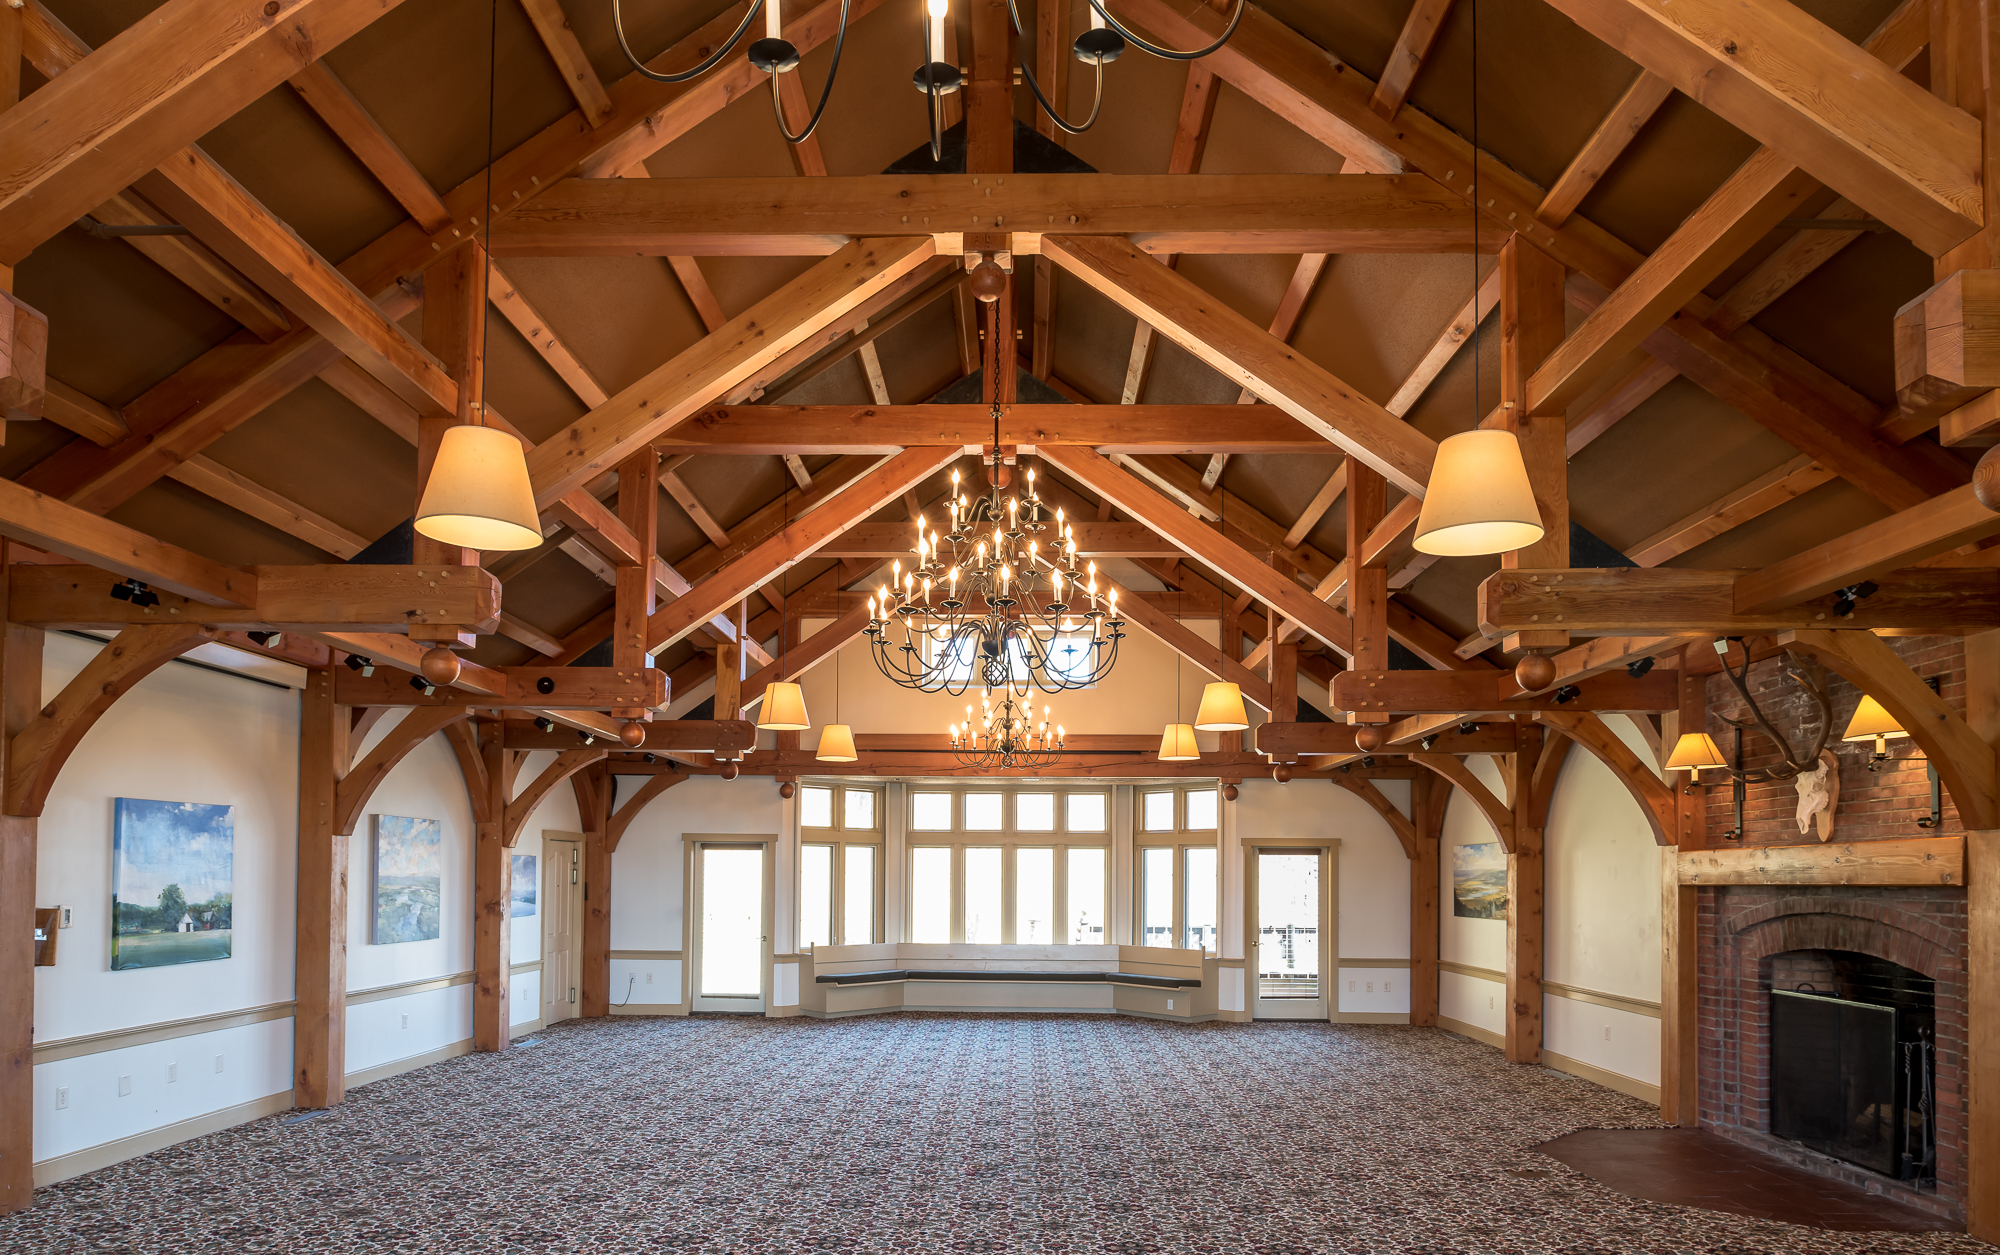 Heavy Timber Ceiling Beams For The Trapp Family Lodge